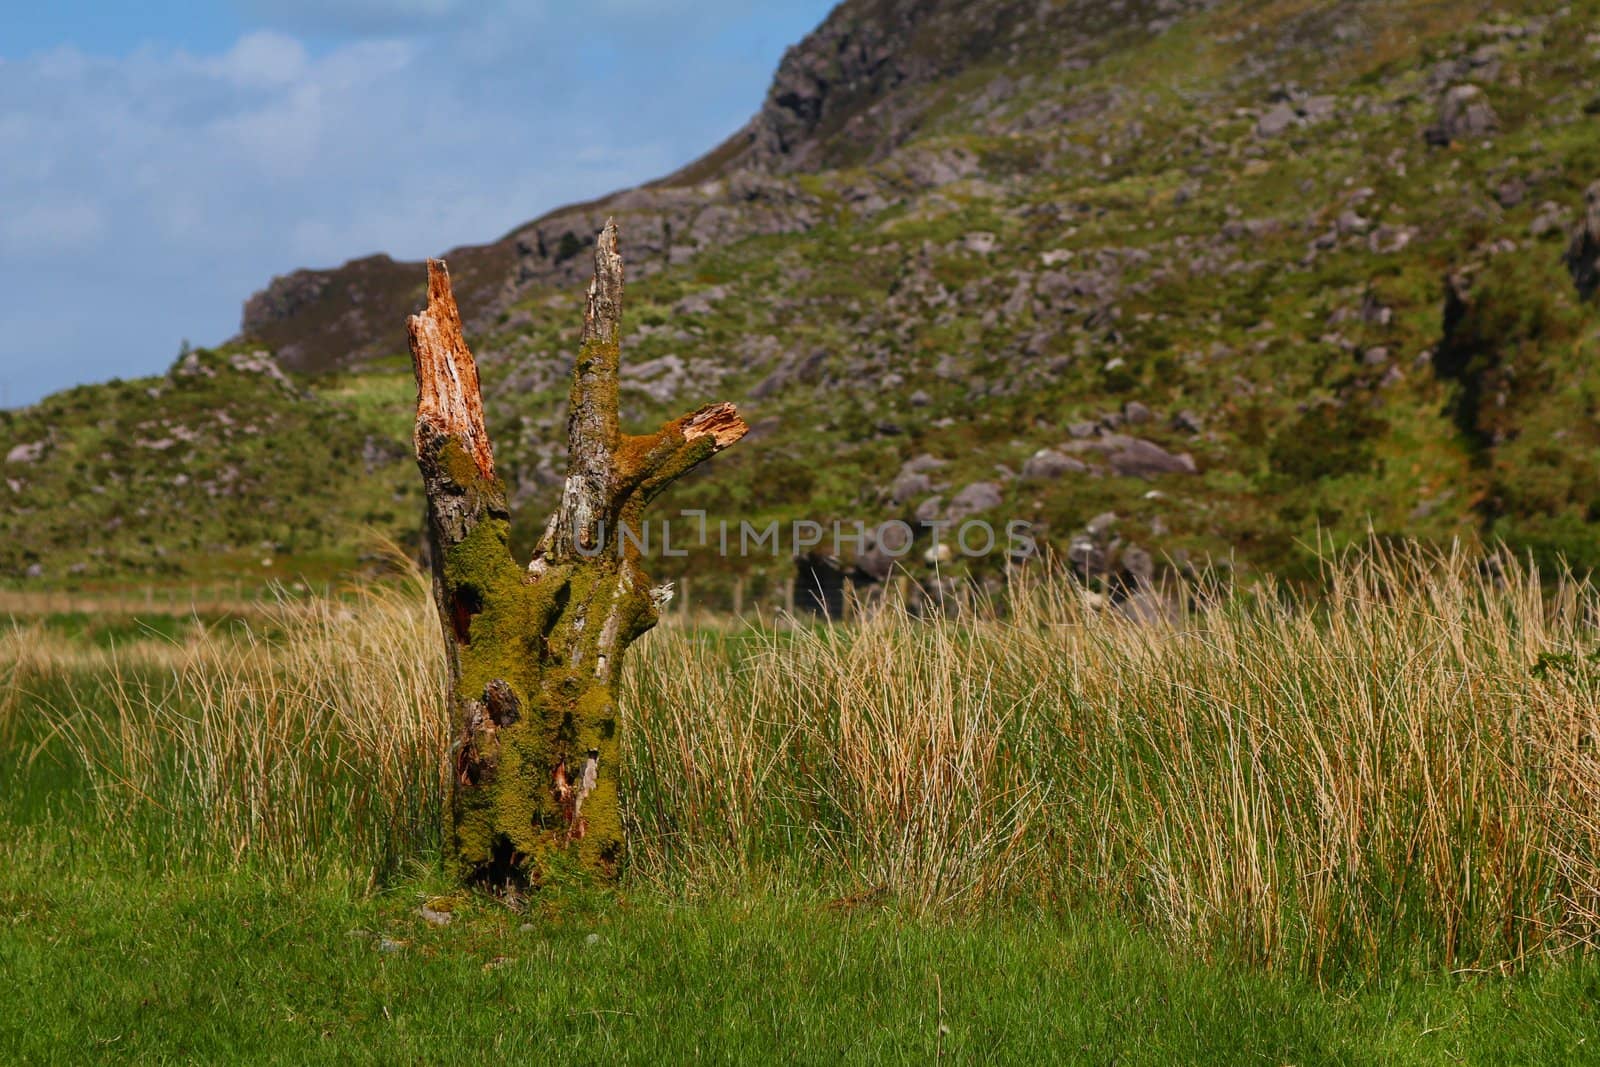 Remains of a tree trunk covered in moss, Gap of Dunloe, Ireland
